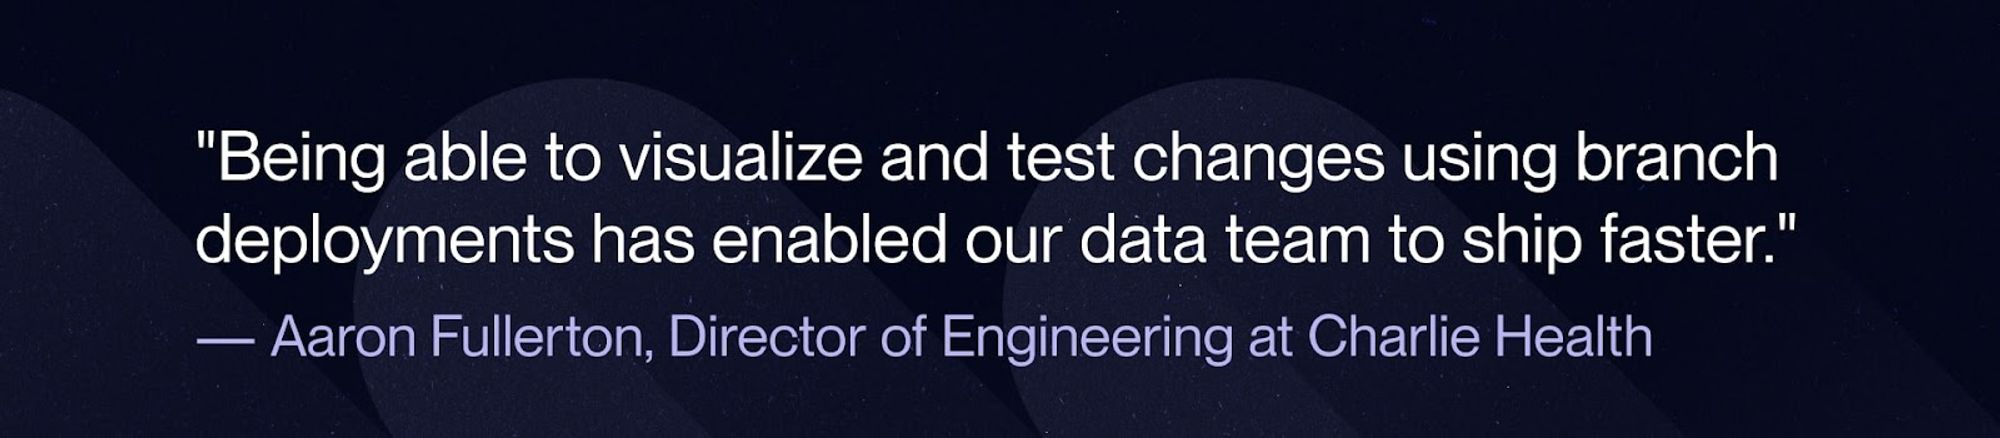 A quote from Aaron Fullerton that talks about how being able to visualize and test changes has enabled faster shipping from their data team.